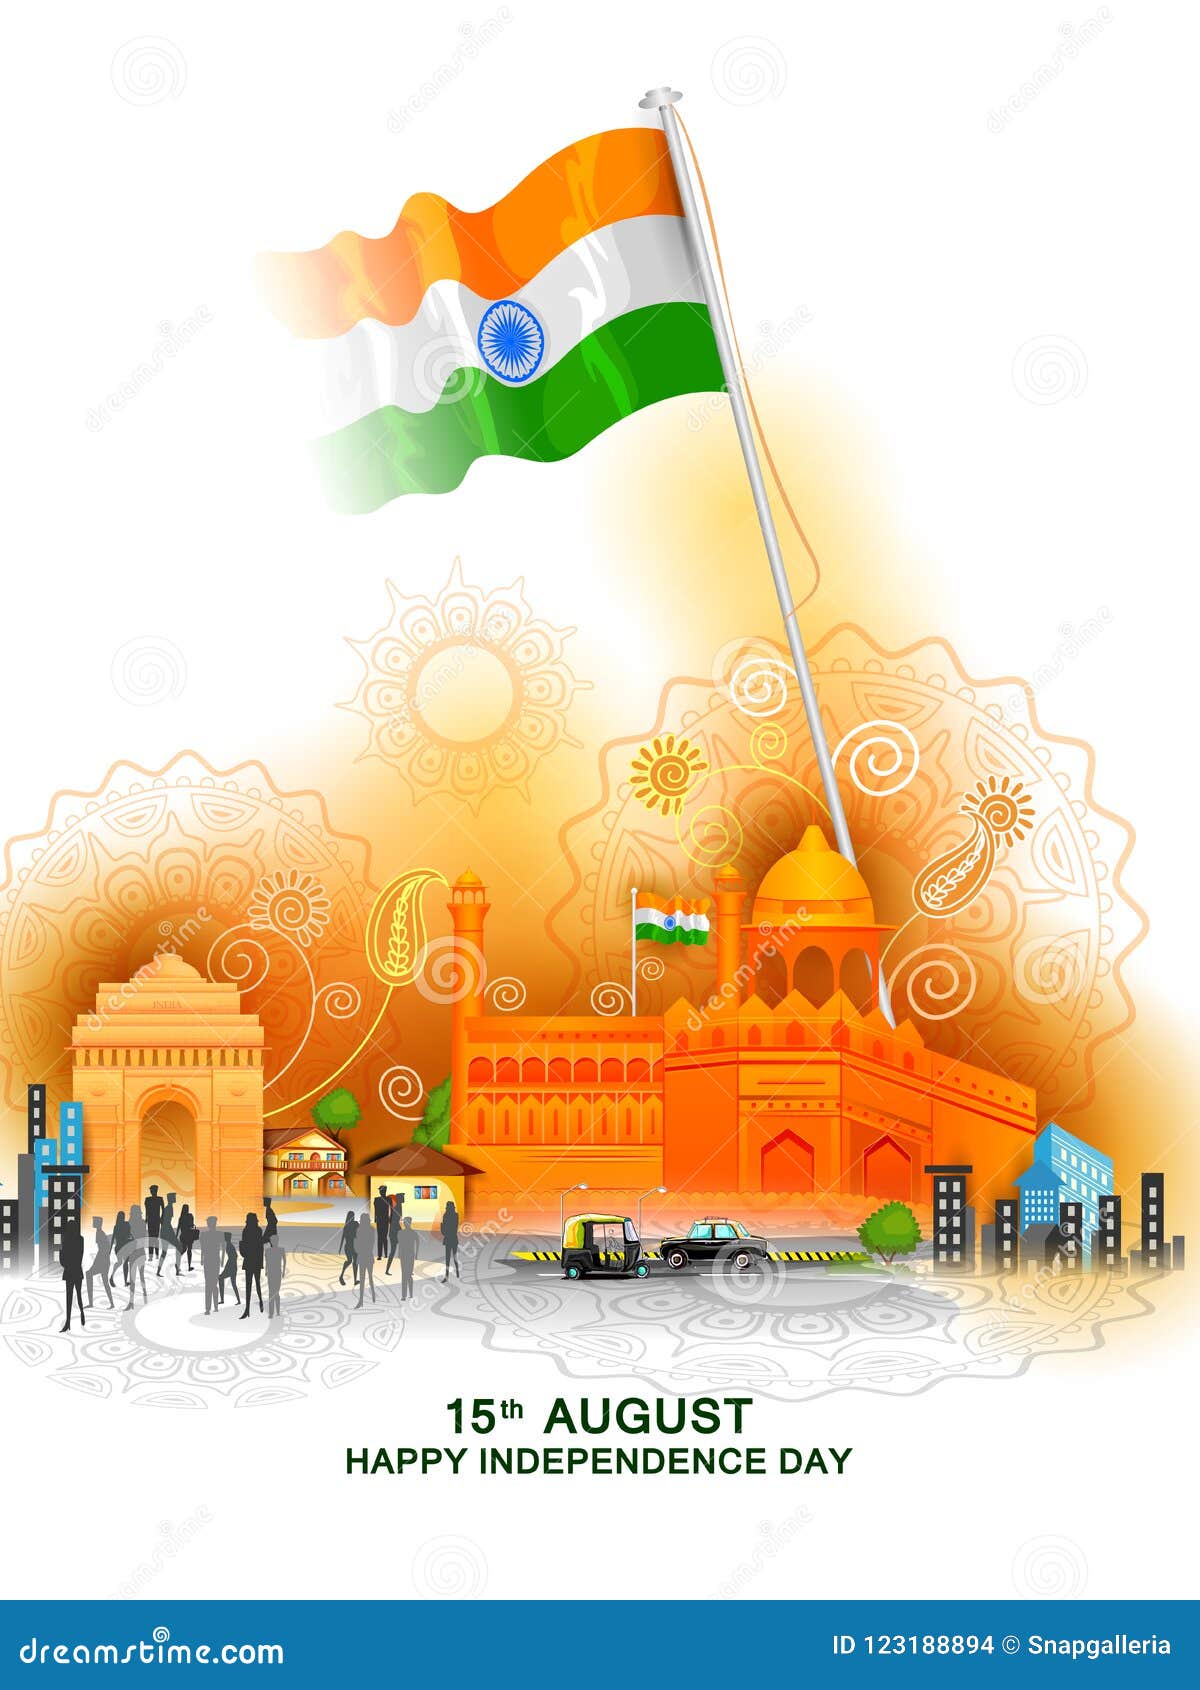 Monument and Landmark of India on Indian Independence Day Celebration  Background Stock Vector - Illustration of festival, nation: 123188894